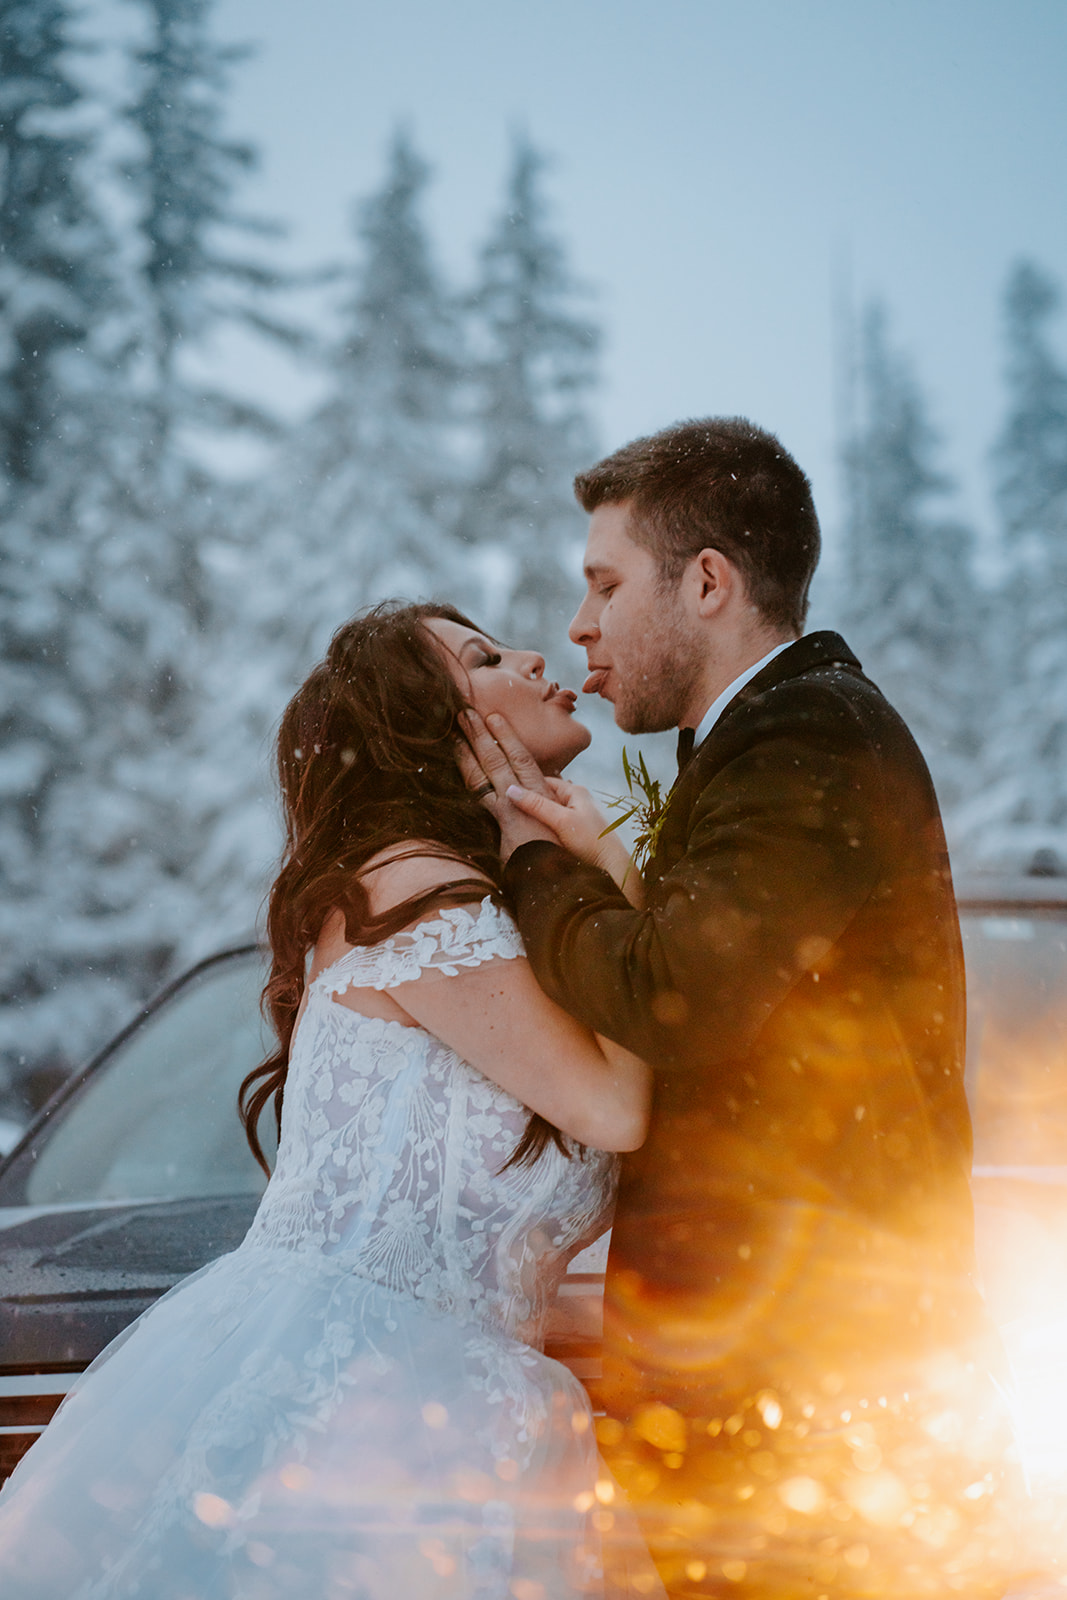 Bride and groom sticking their tongues out at each other in front of headlights during a snowstorm on Mt. Hood